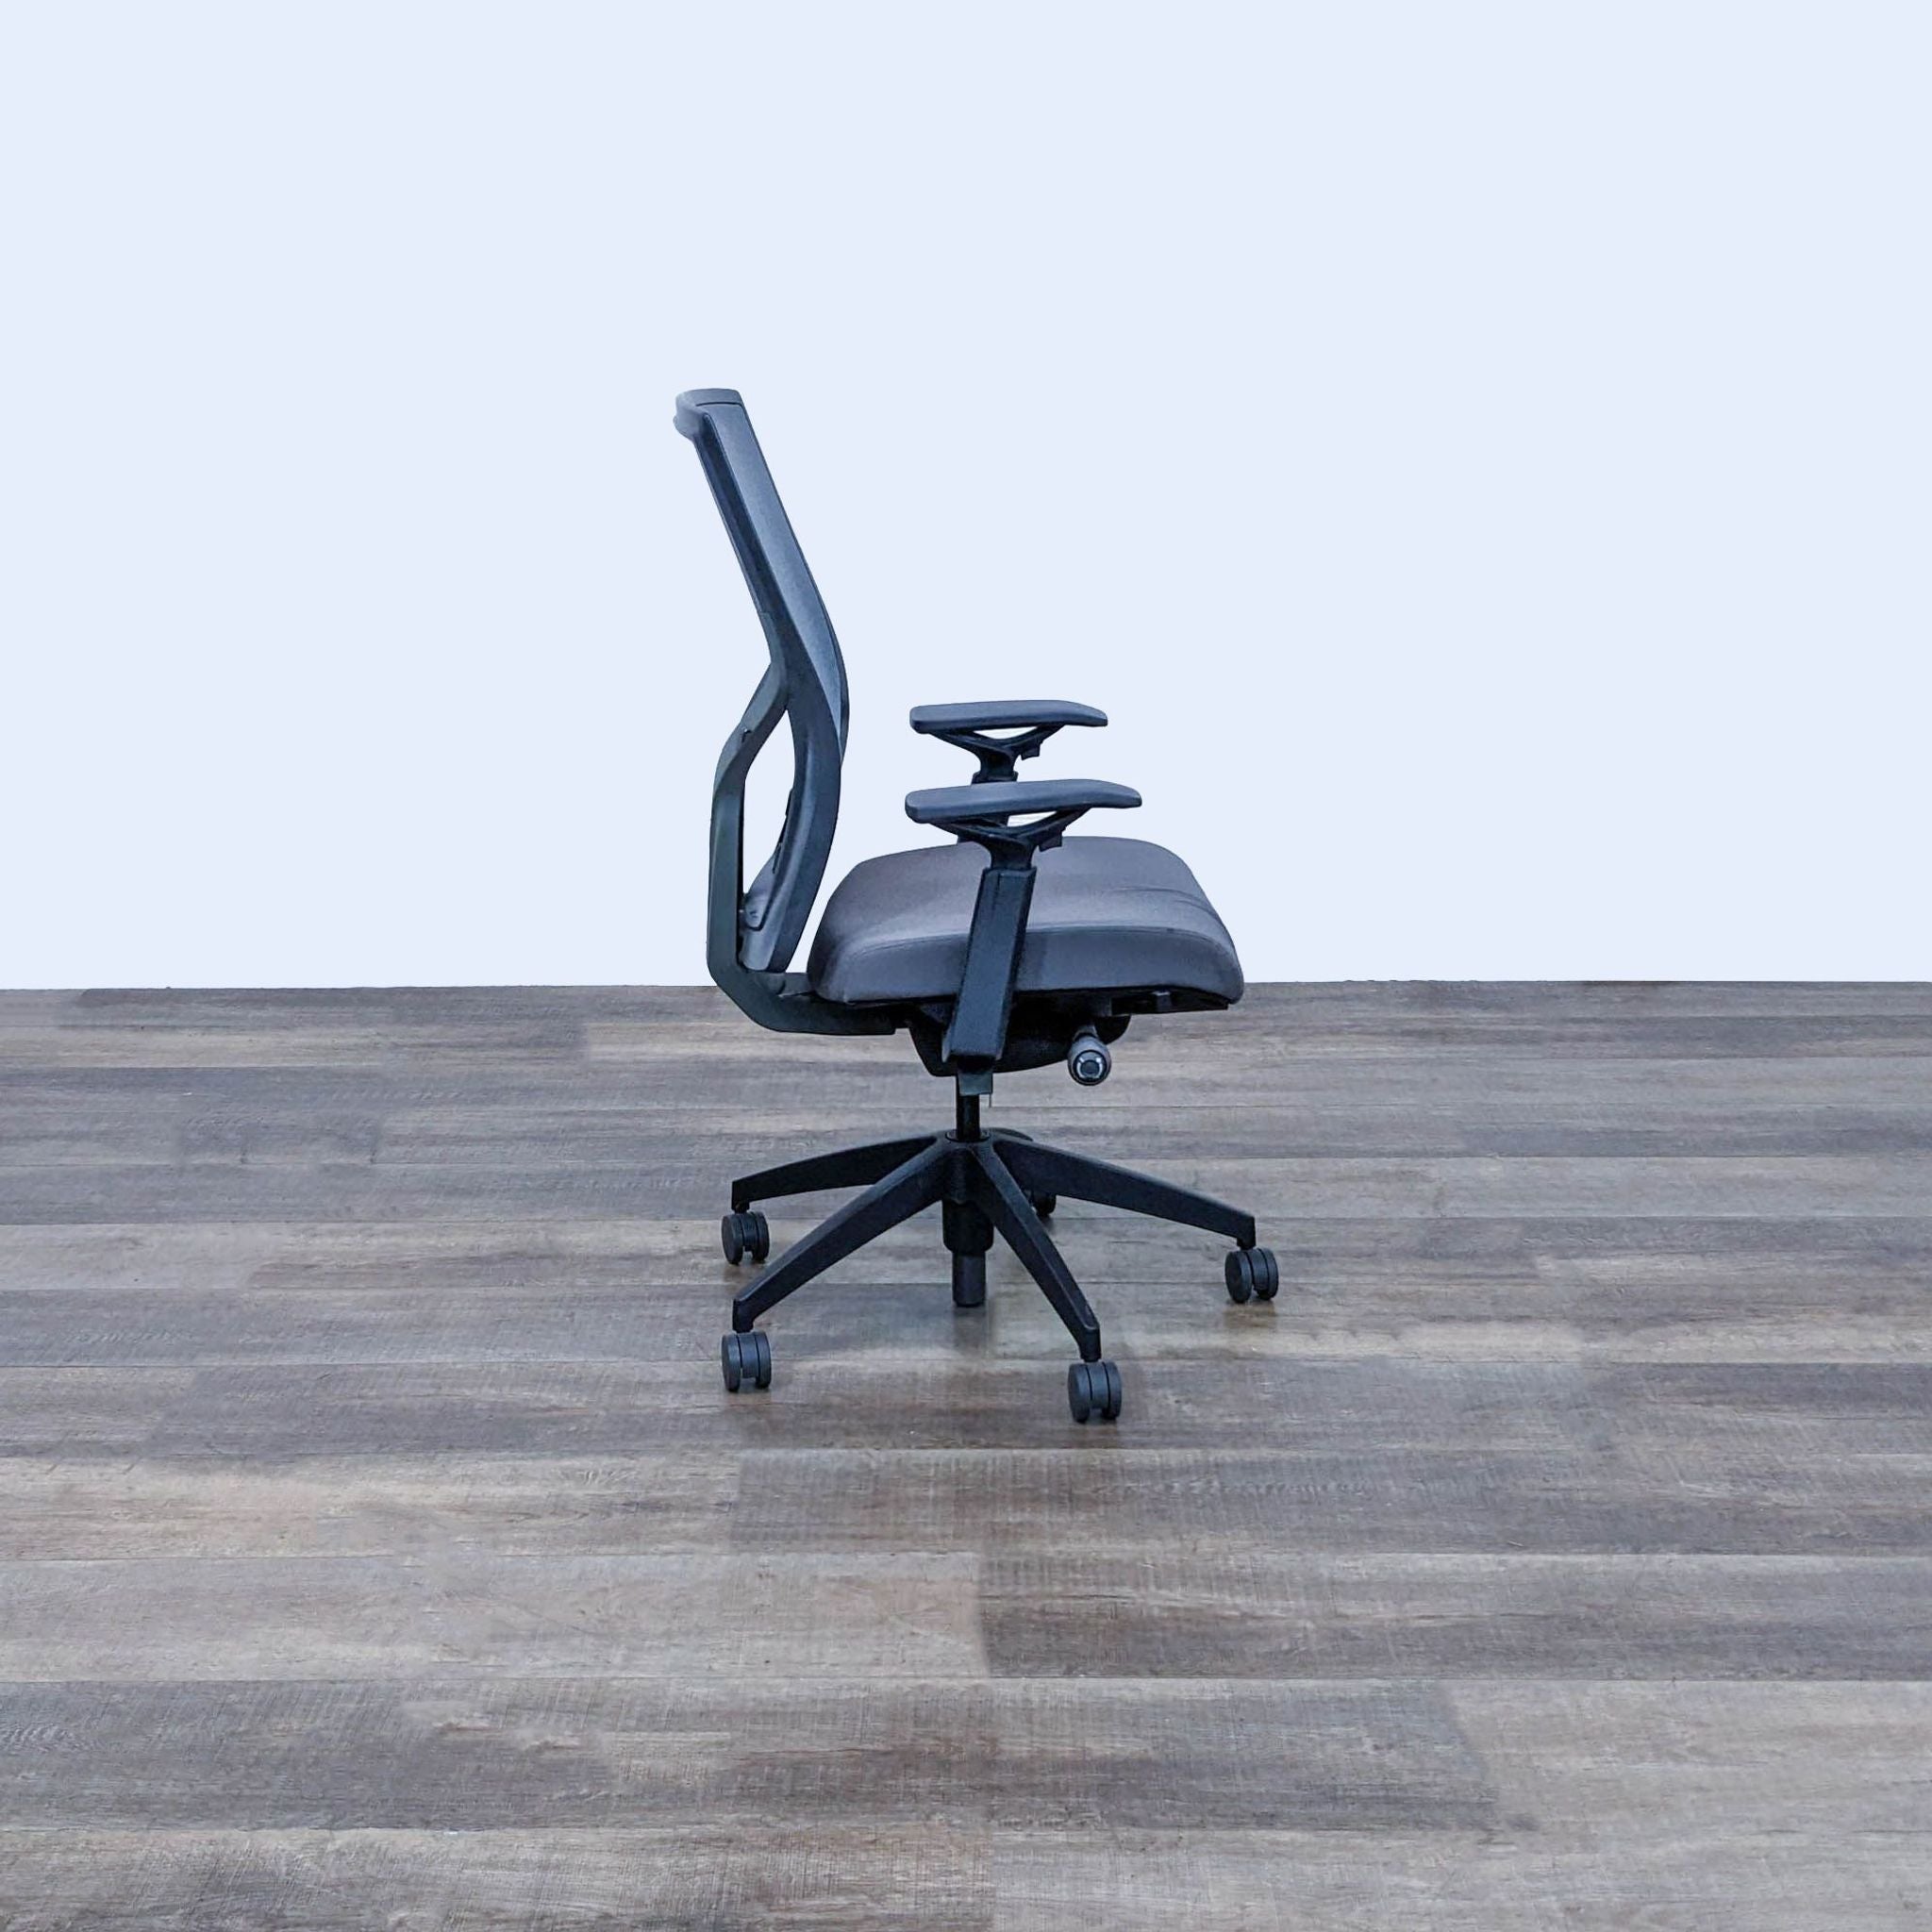 Alt text 2: Side view of a SitOnIt Torsa mesh office chair showing profile, adjustable armrest, and nylon caster wheels, against a plain background.